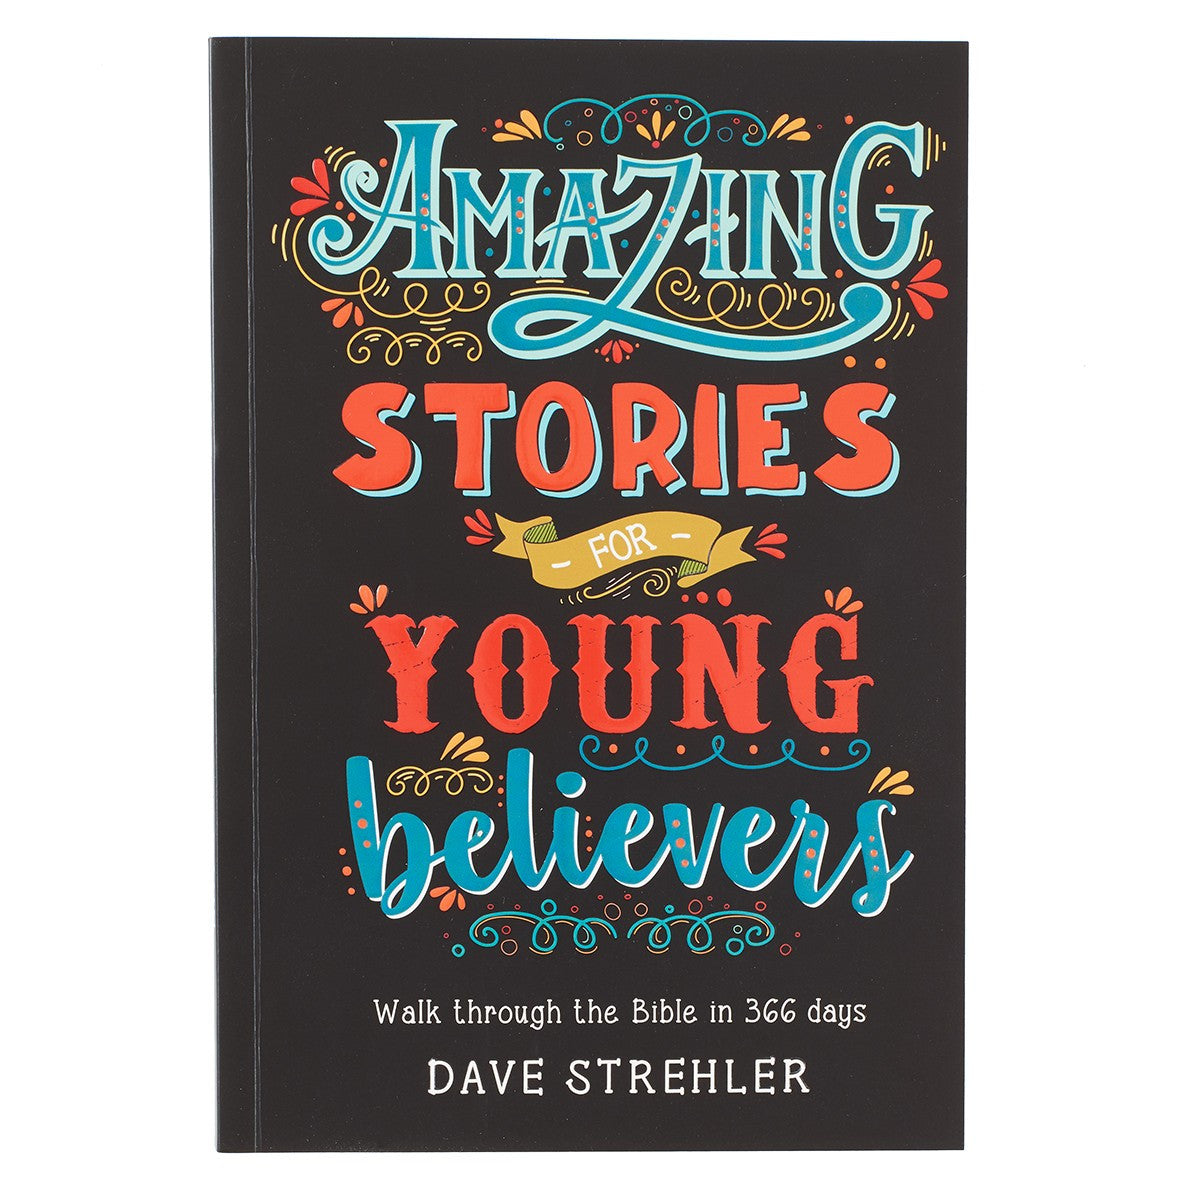 Amazing Stories for Young Believers